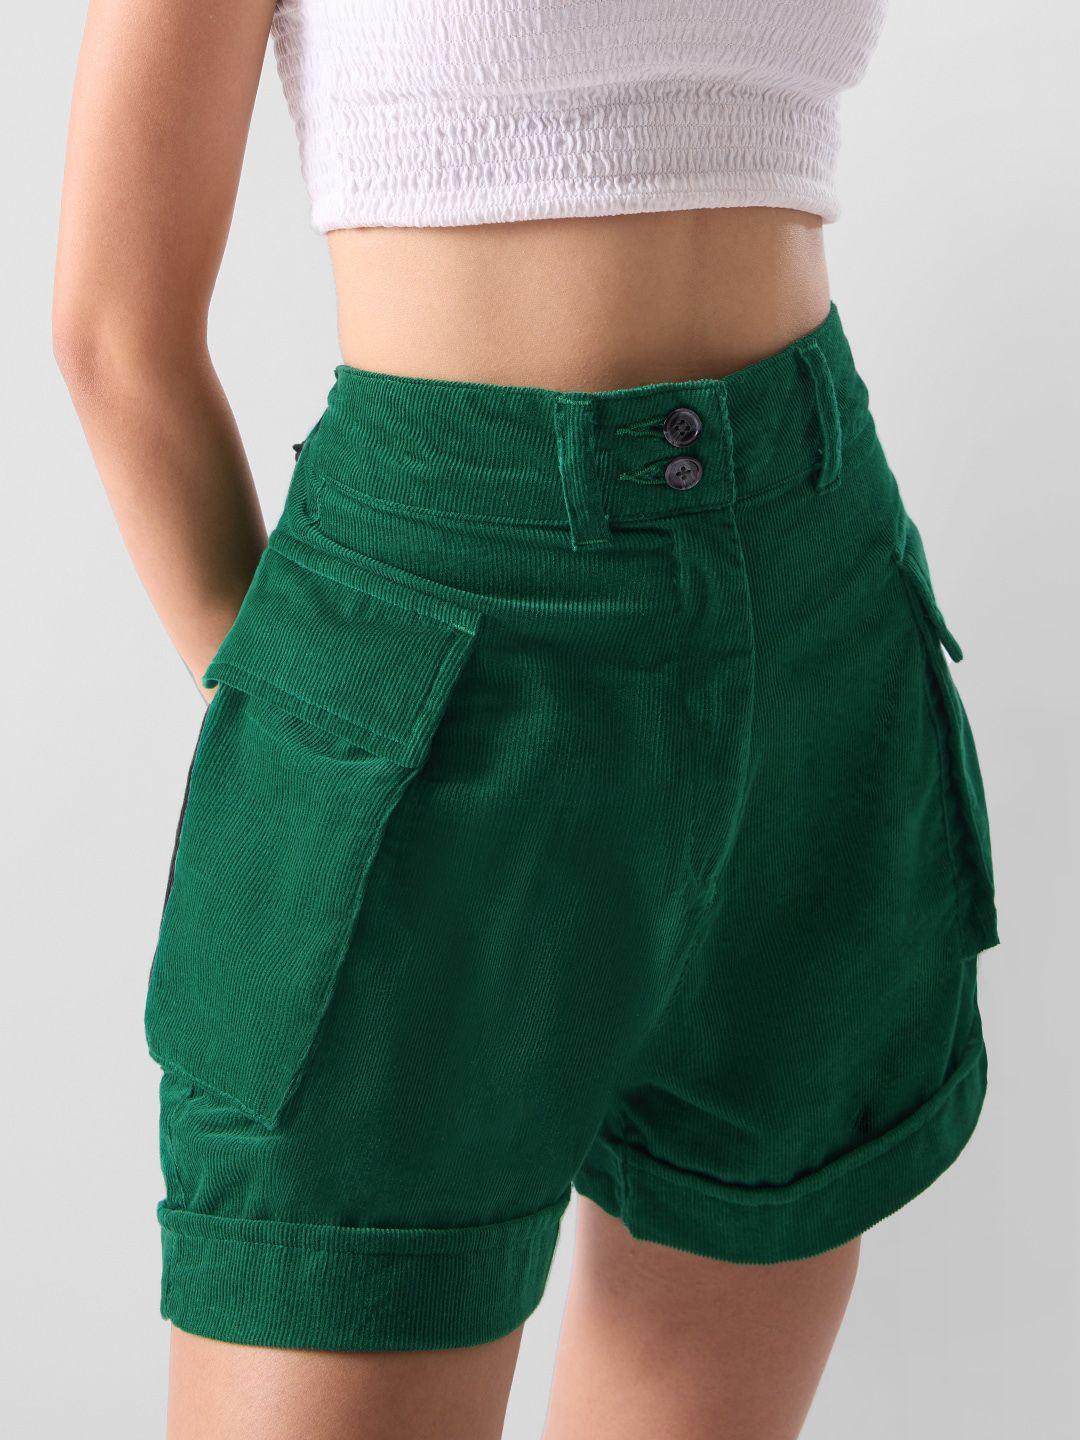 the souled store green mid rise shorts